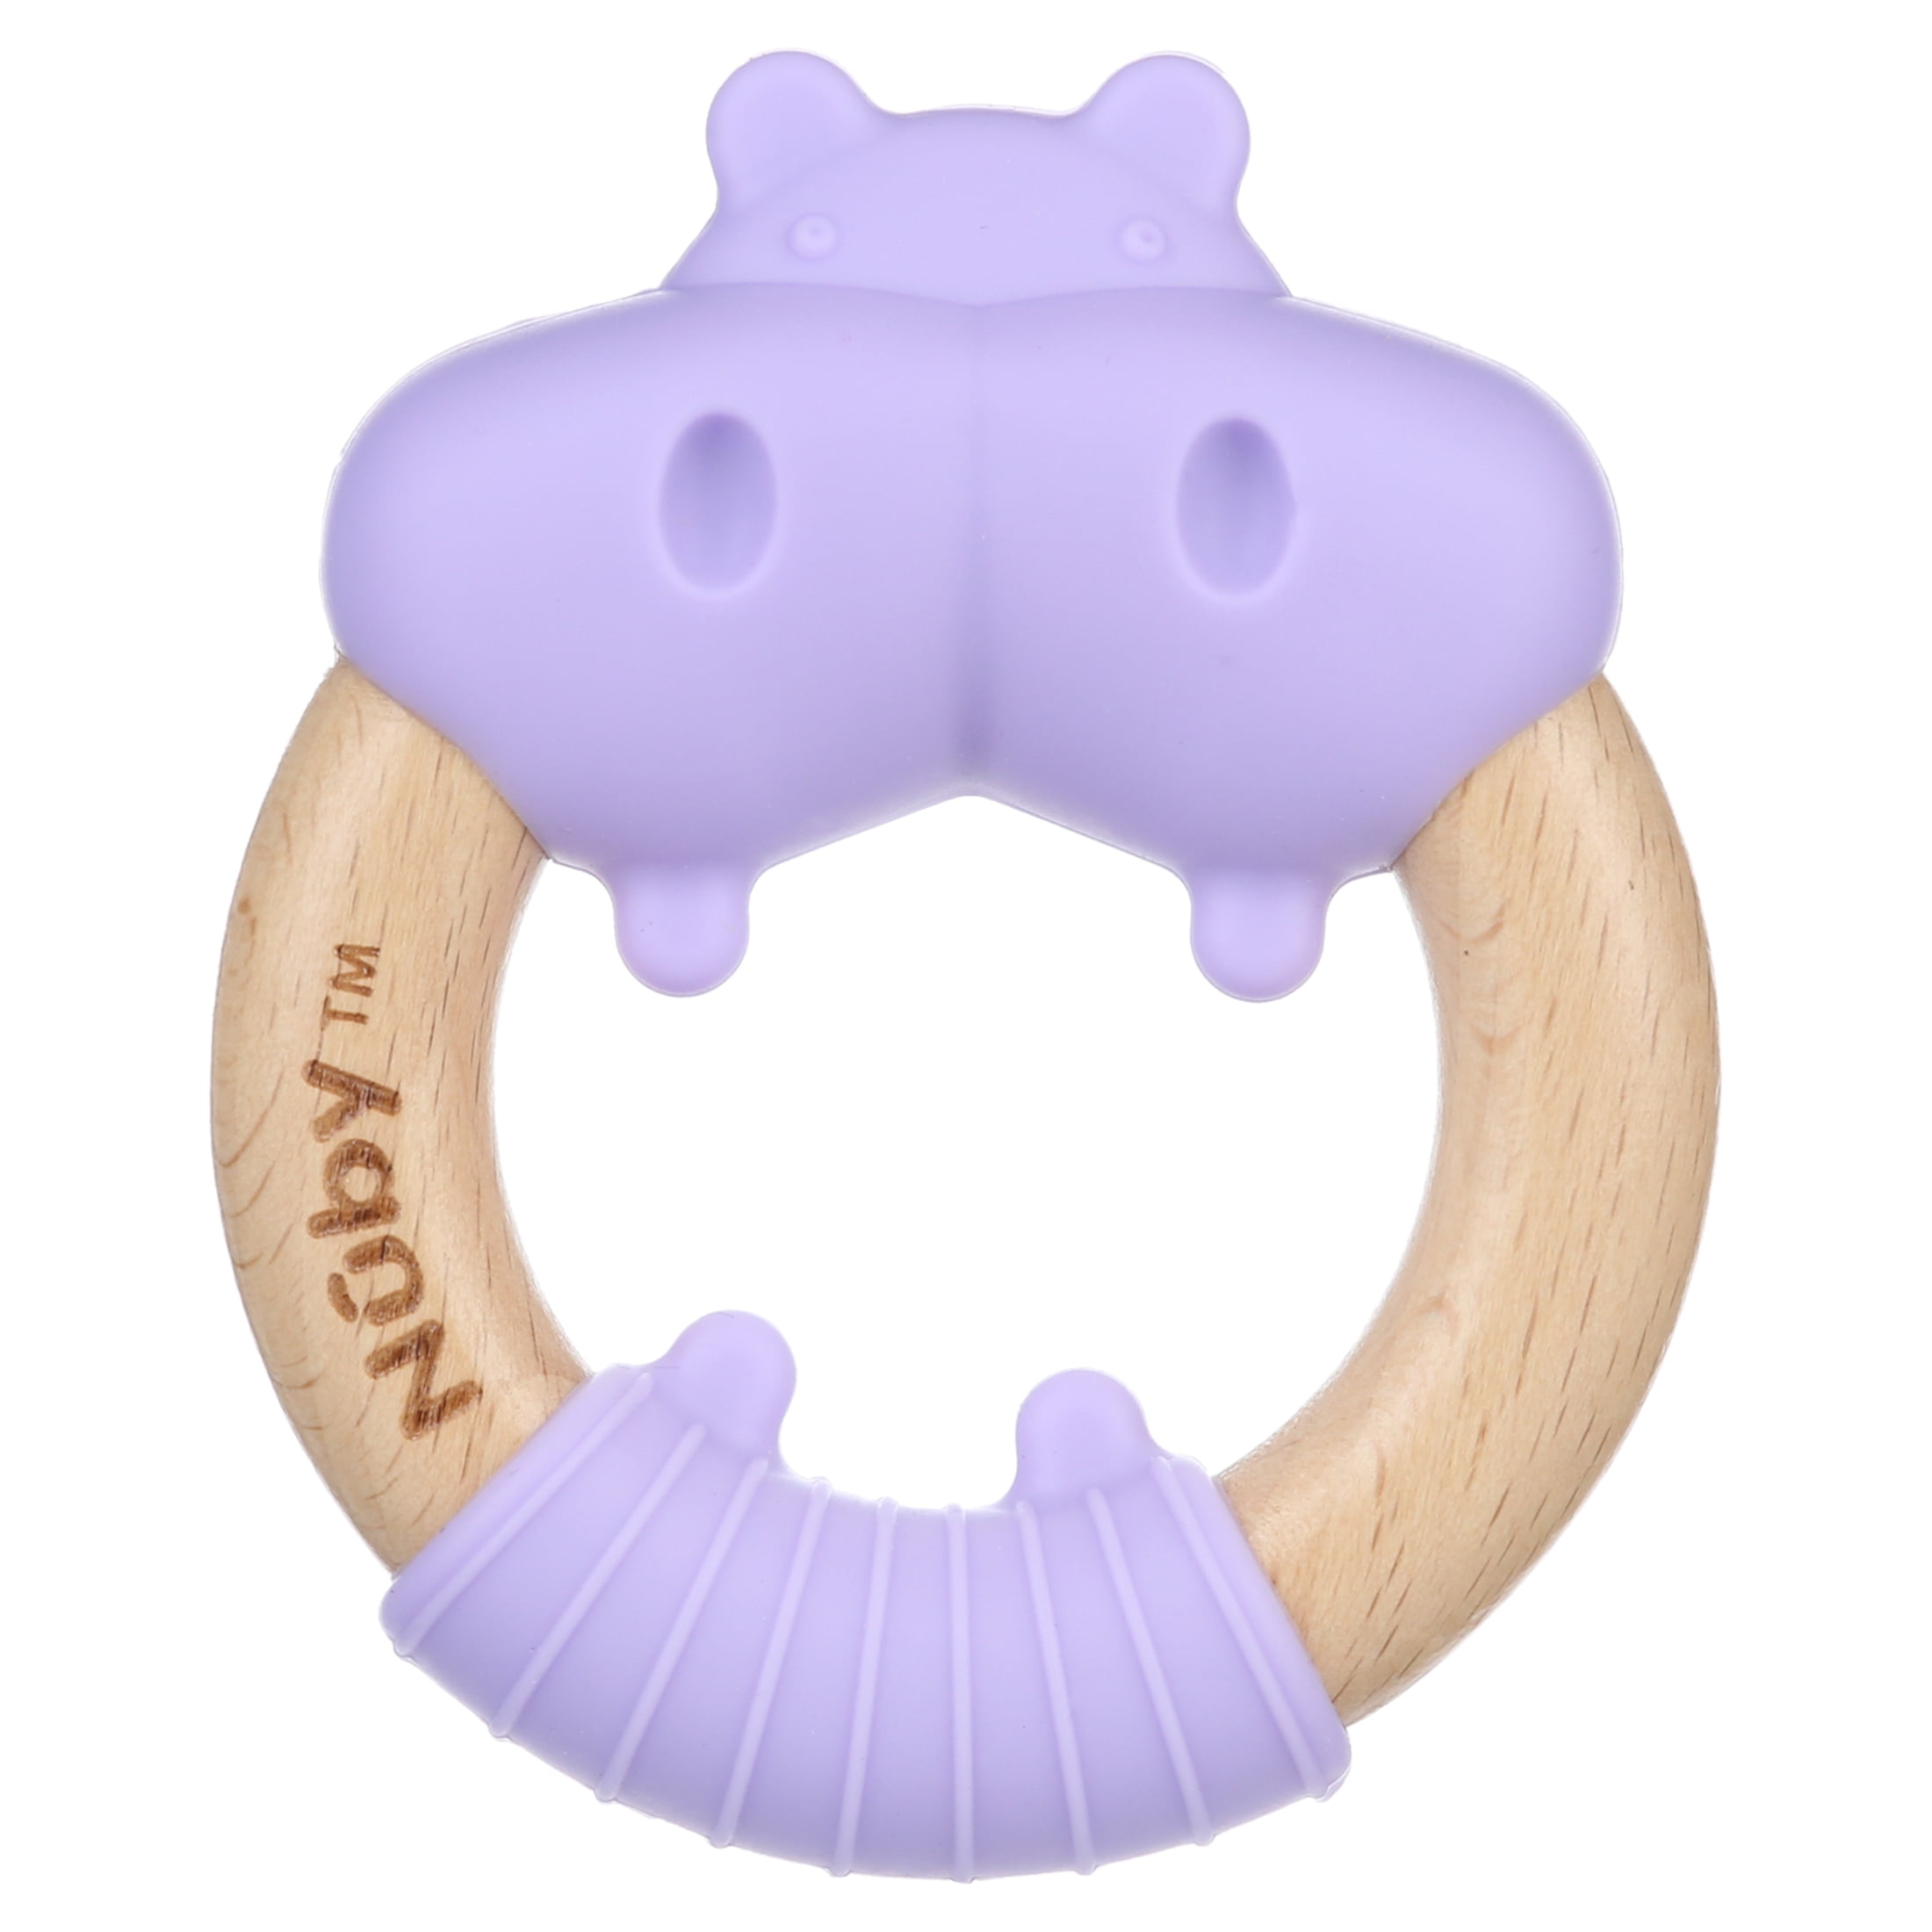 Green Sprouts Silicone 2 Teether's One Pink One Purple 3 Plus Months New 